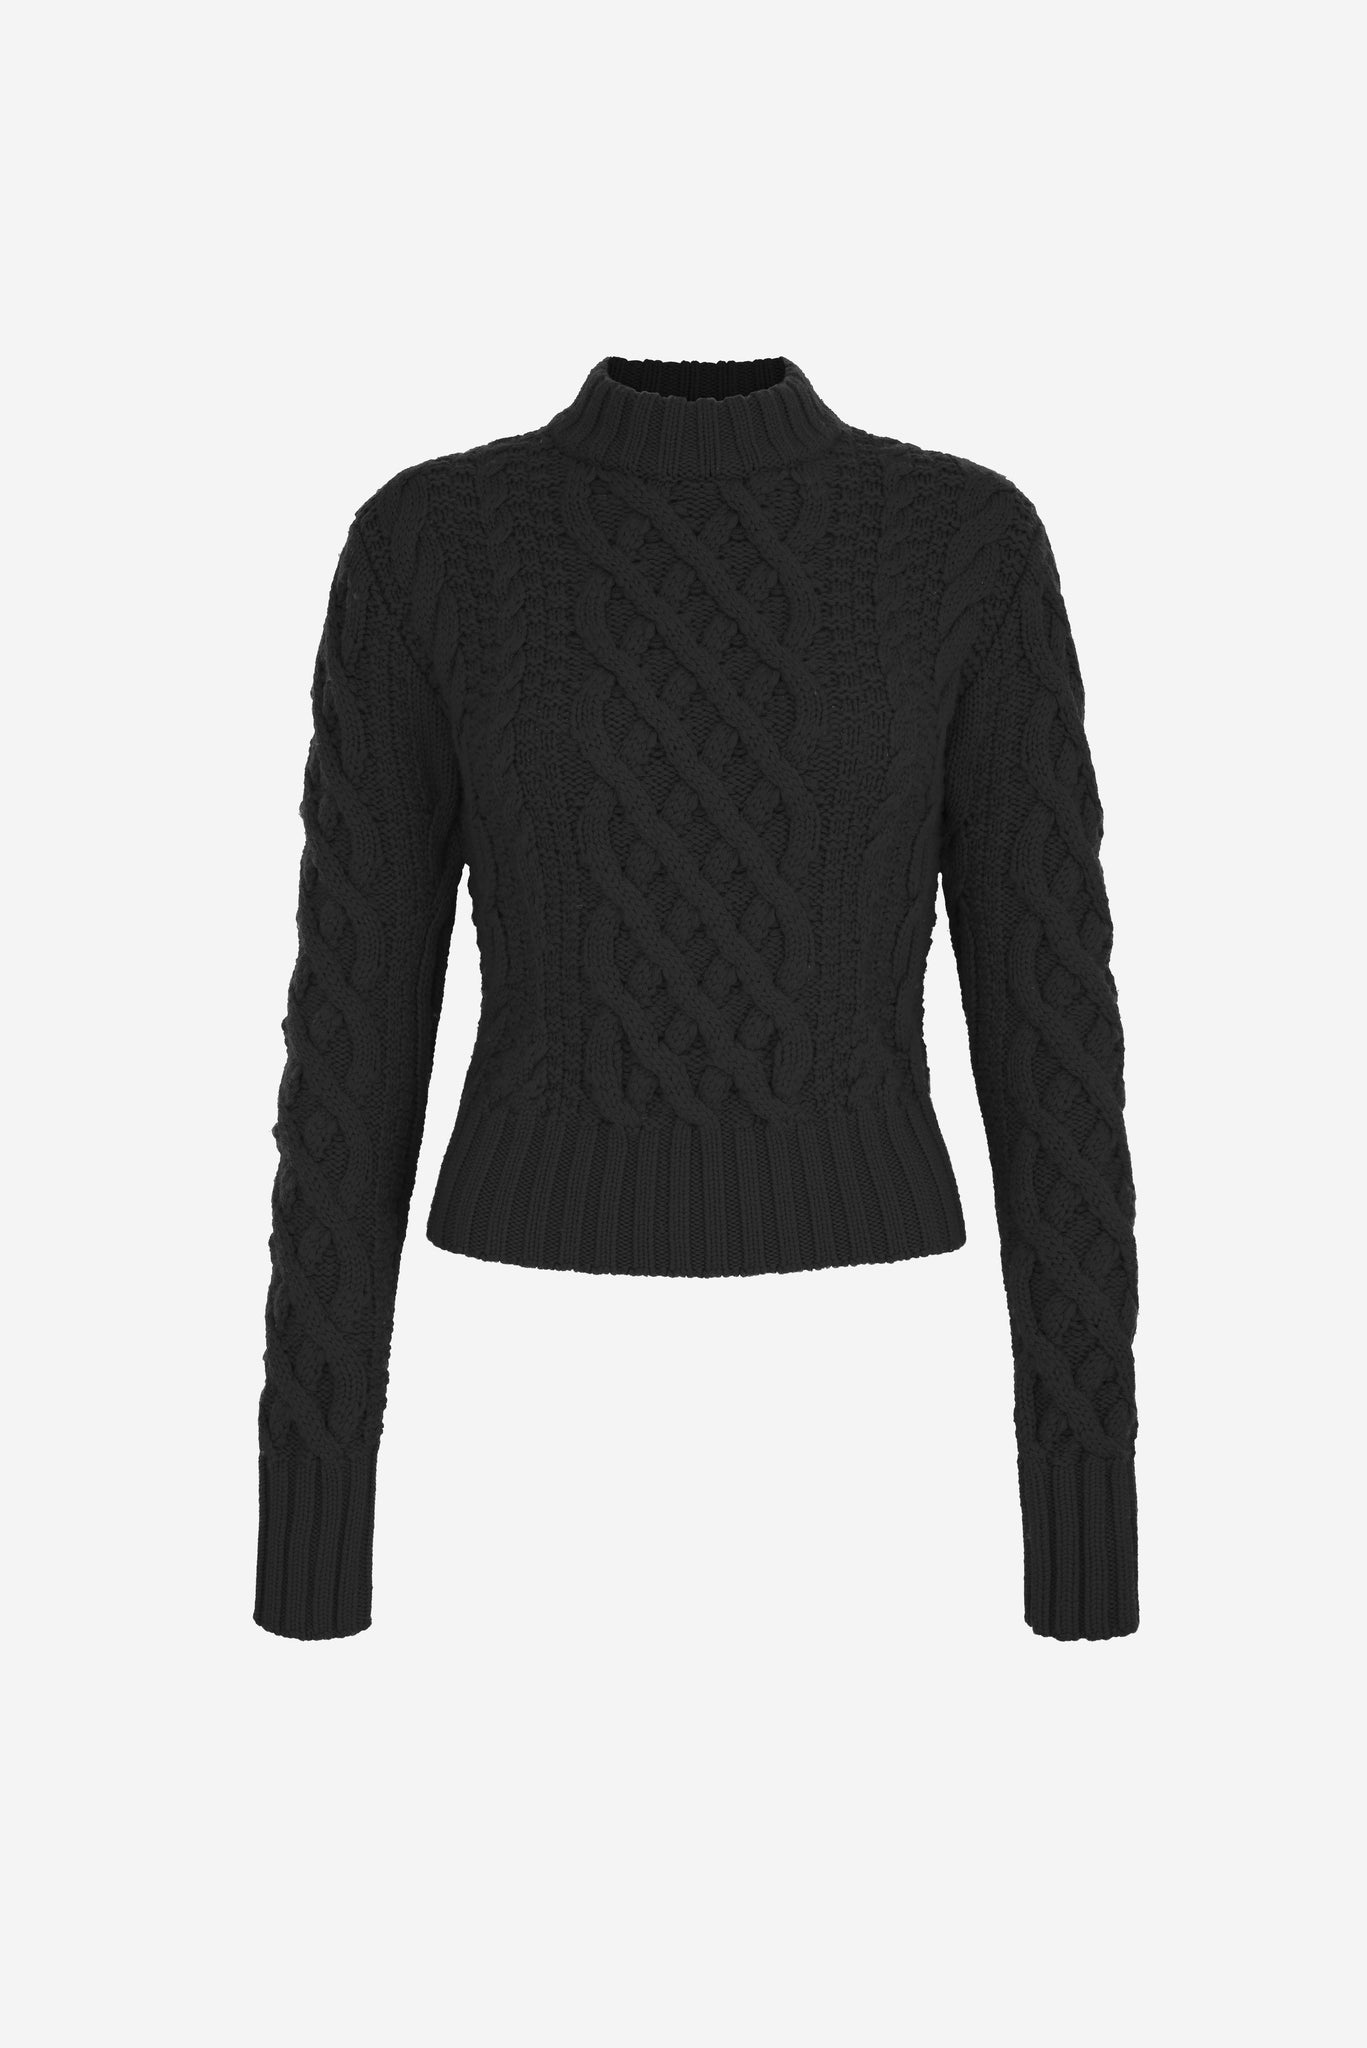 Emory Black Cable Knit Jumper